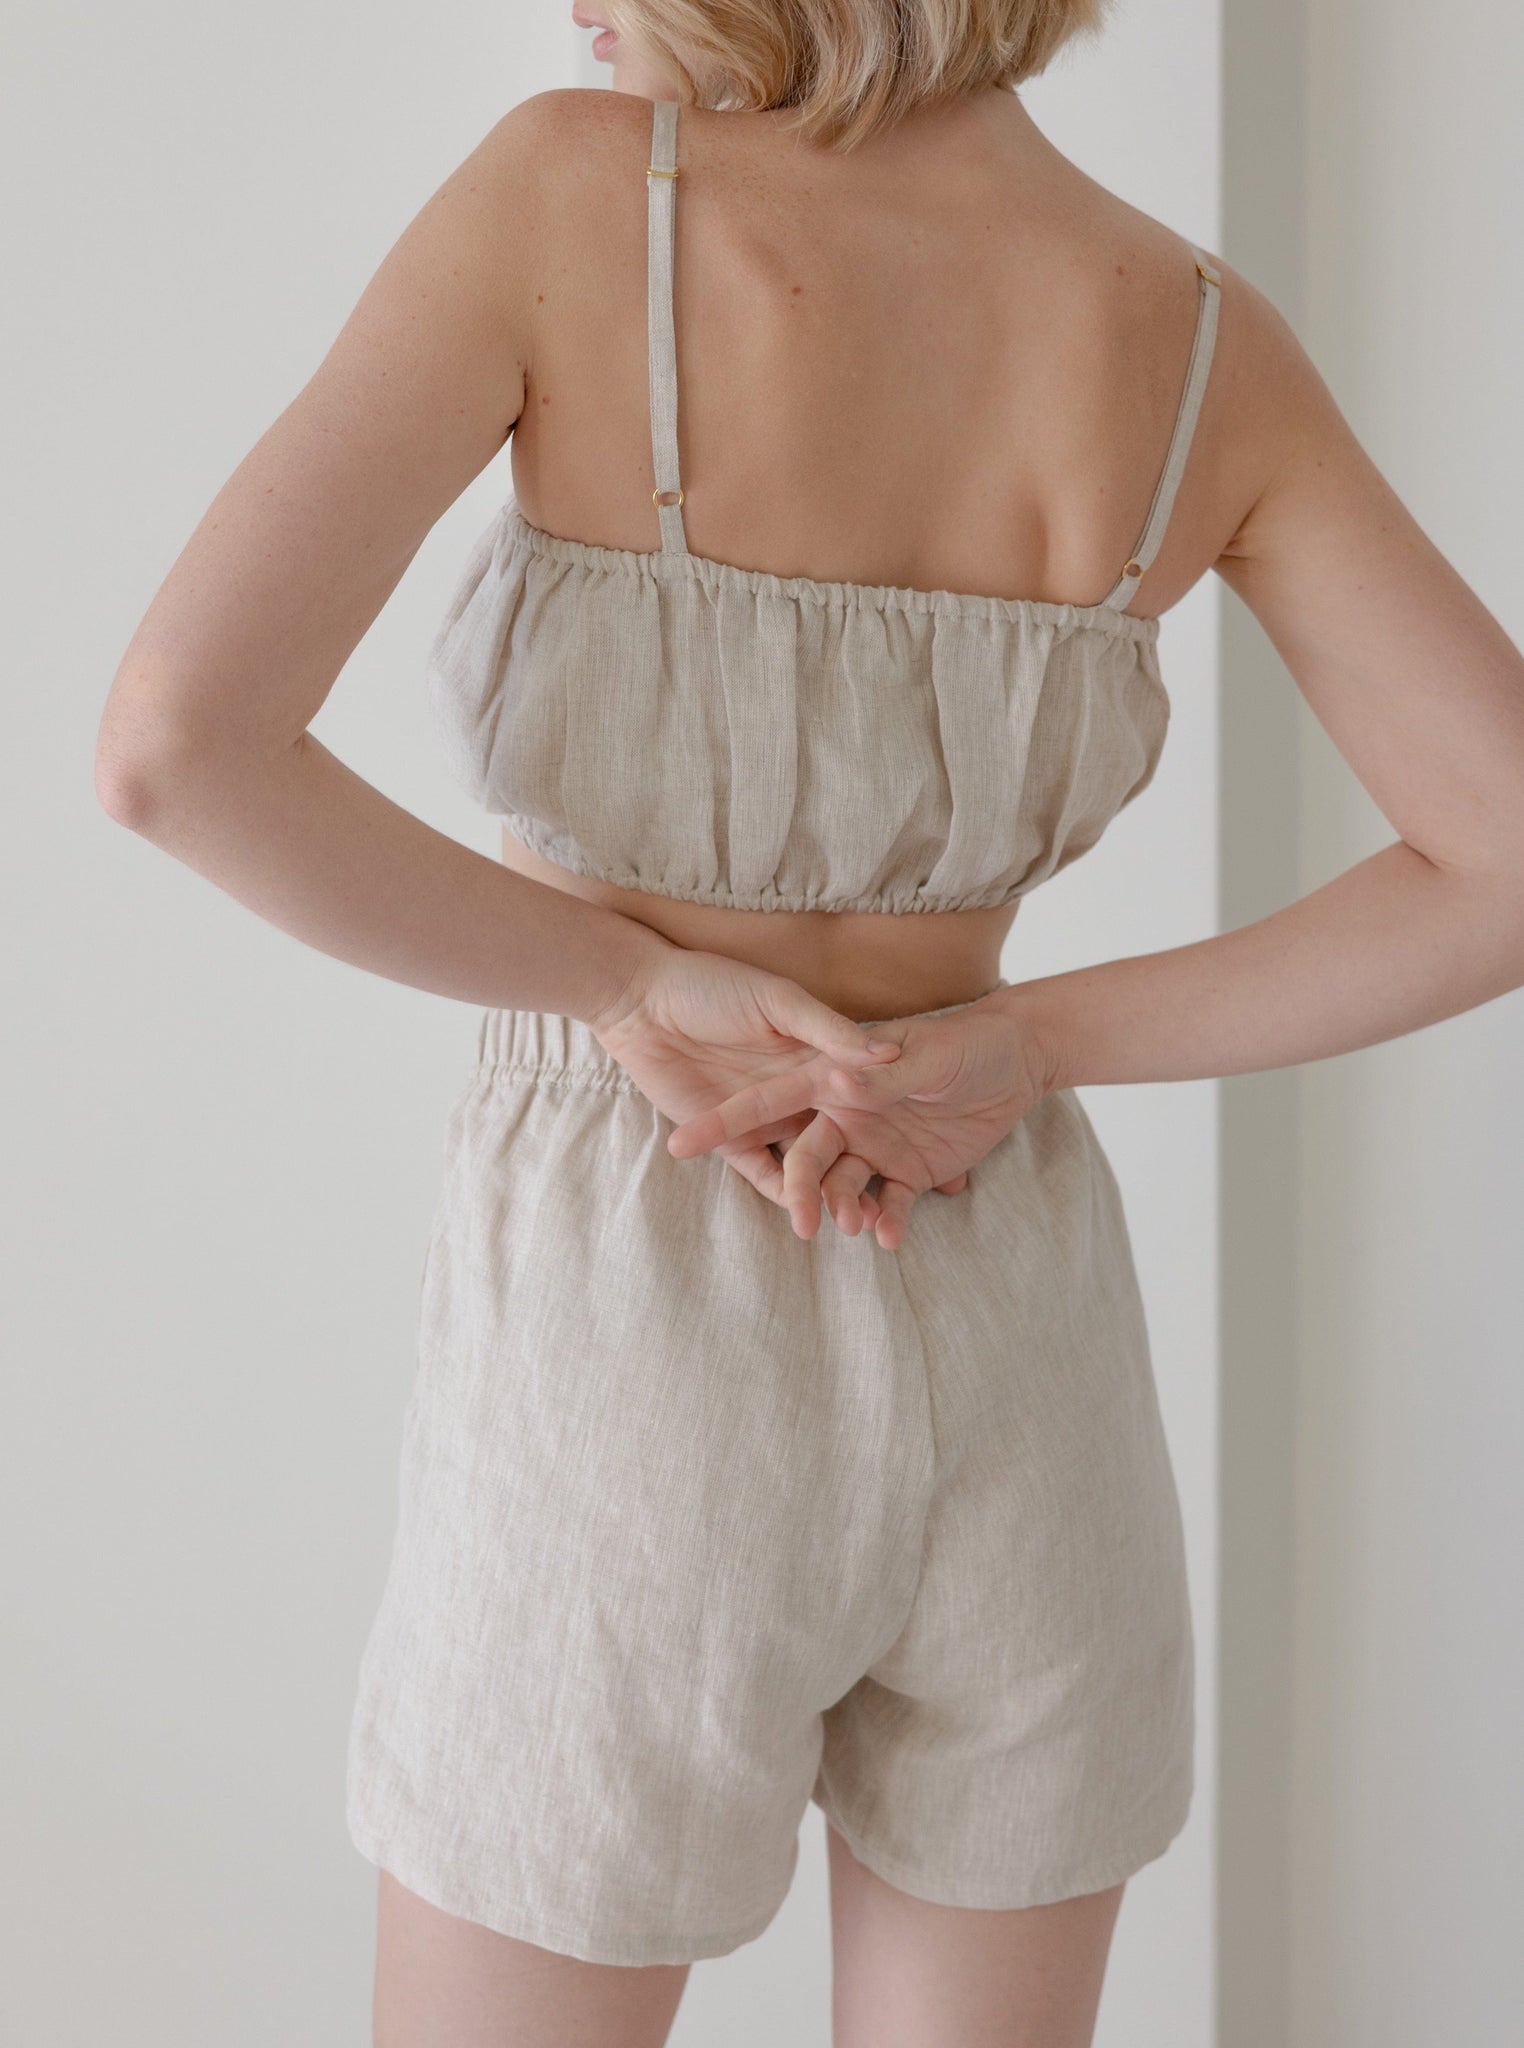 The back view of a woman wearing an Elastic Bandeau - Natural - Sample linen top.